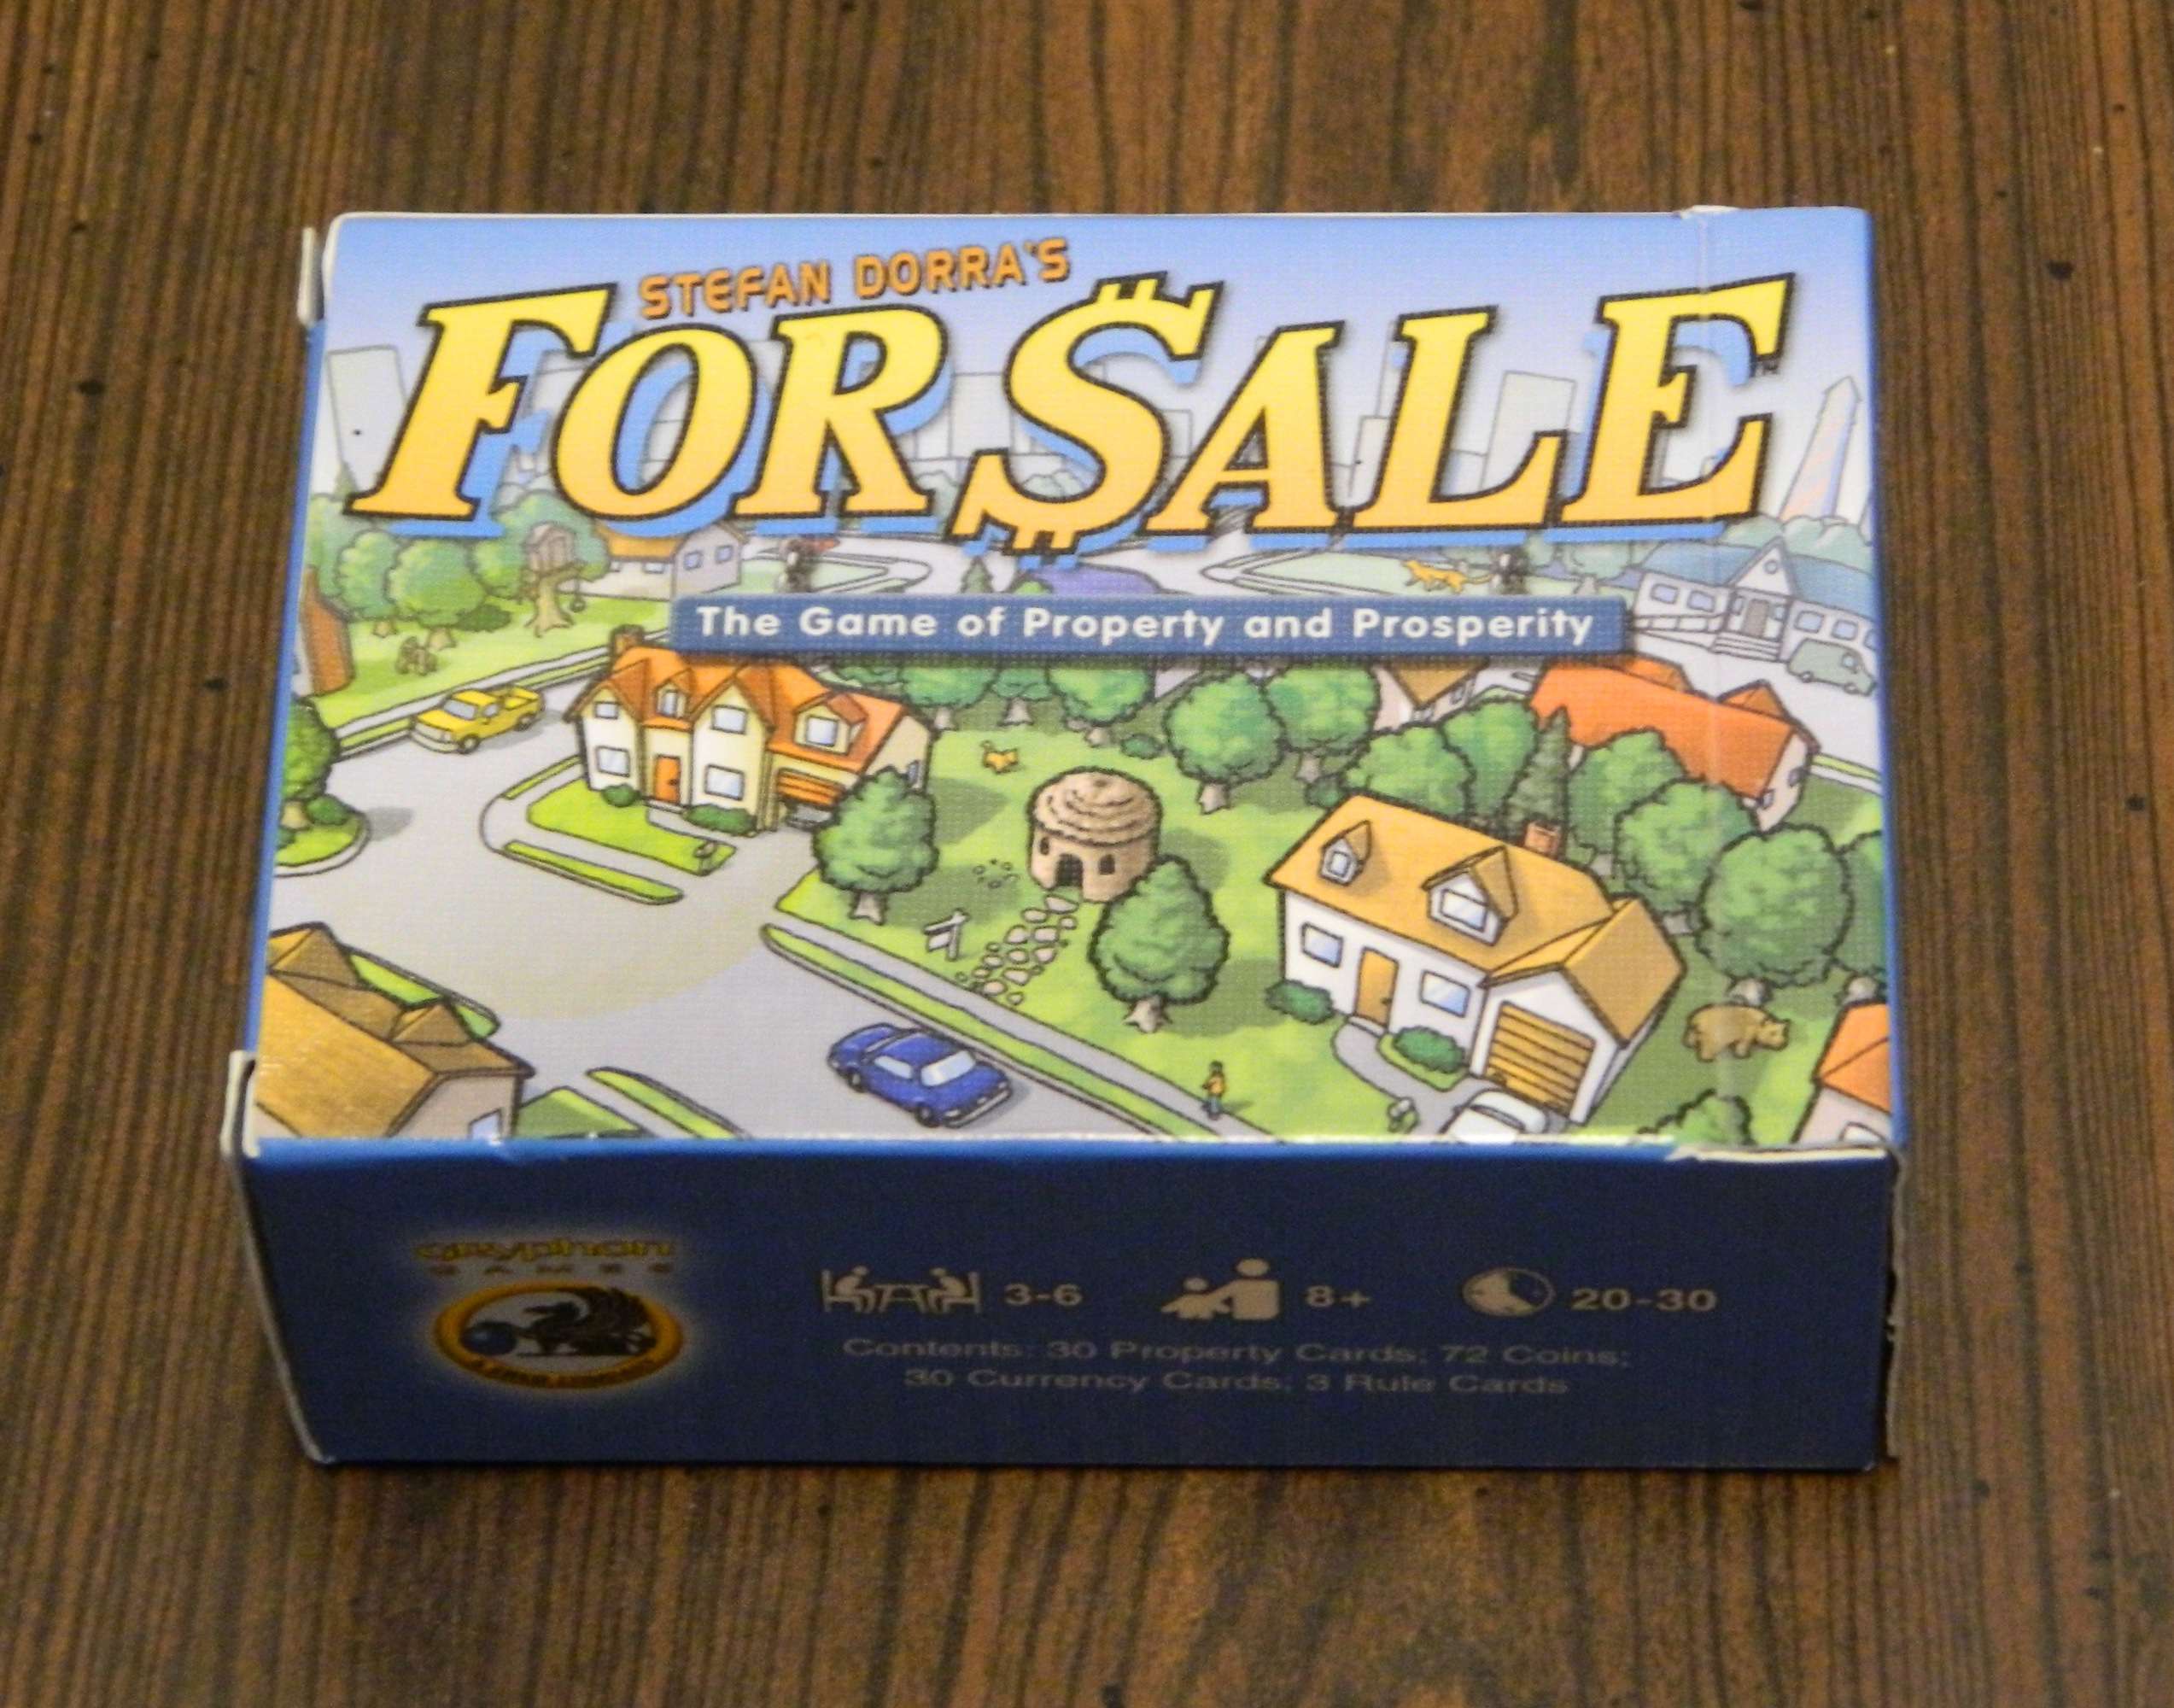 For Sale Card Game Review and Instructions